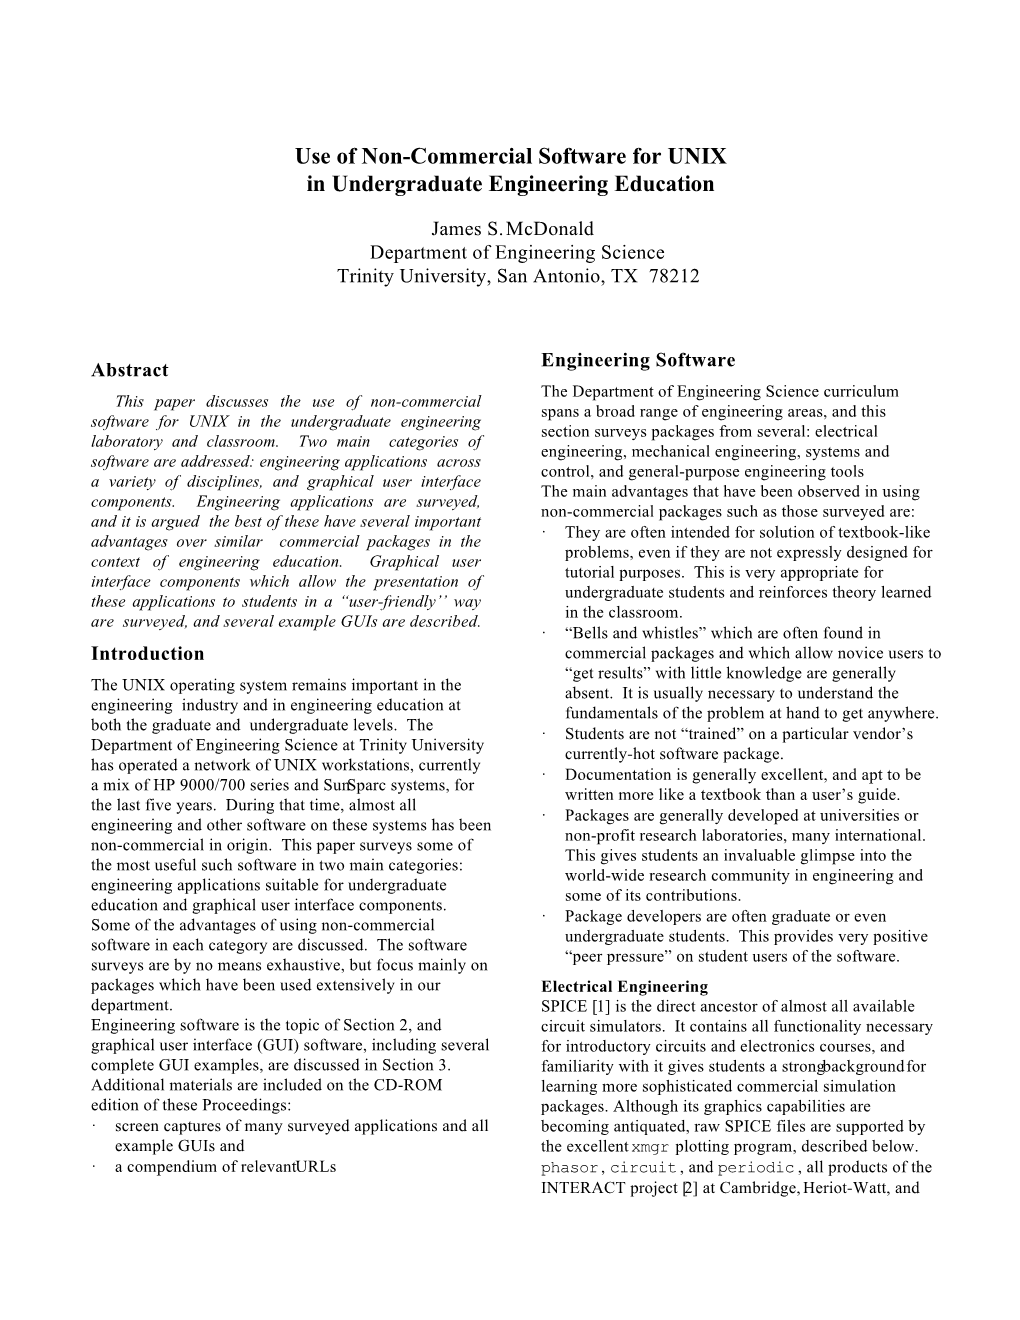 Use of Non-Commercial Software for UNIX in Undergraduate Engineering Education